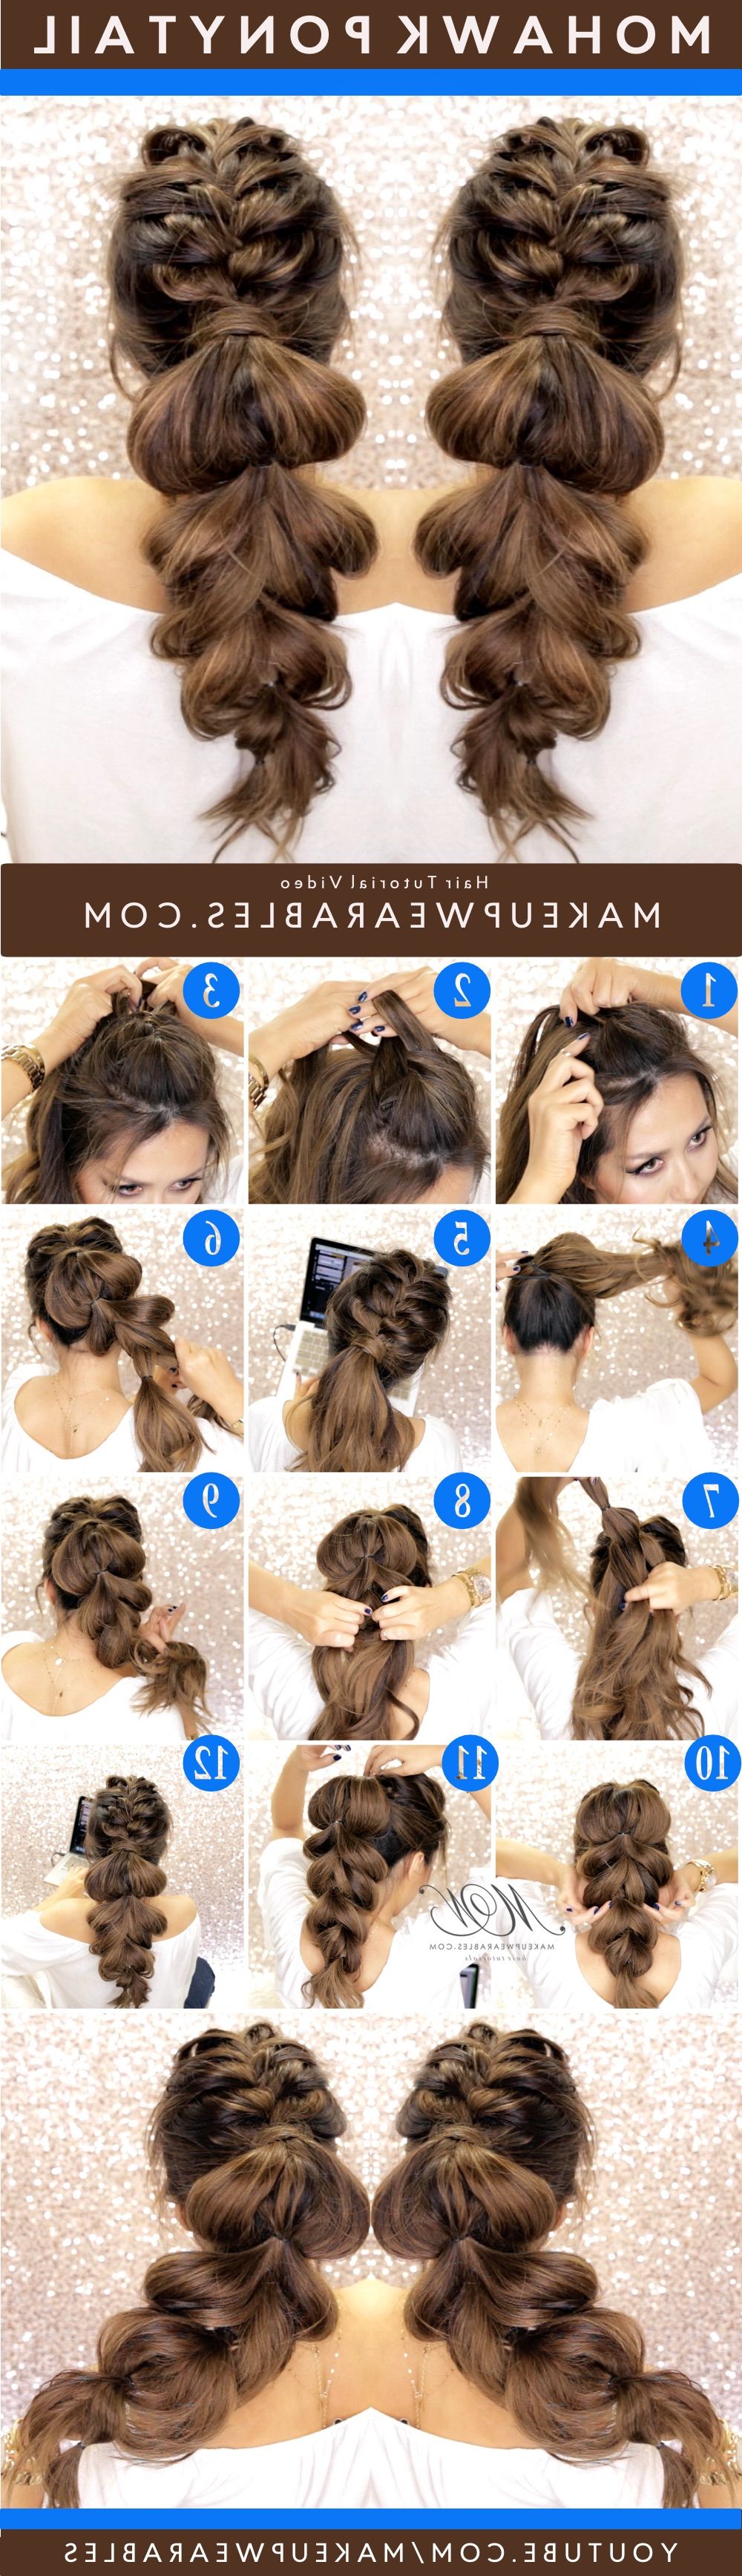 Most Current Romantic Ponytail Updo Hairstyles Intended For Most Romantic Mohawk Braid Ever! (View 10 of 20)